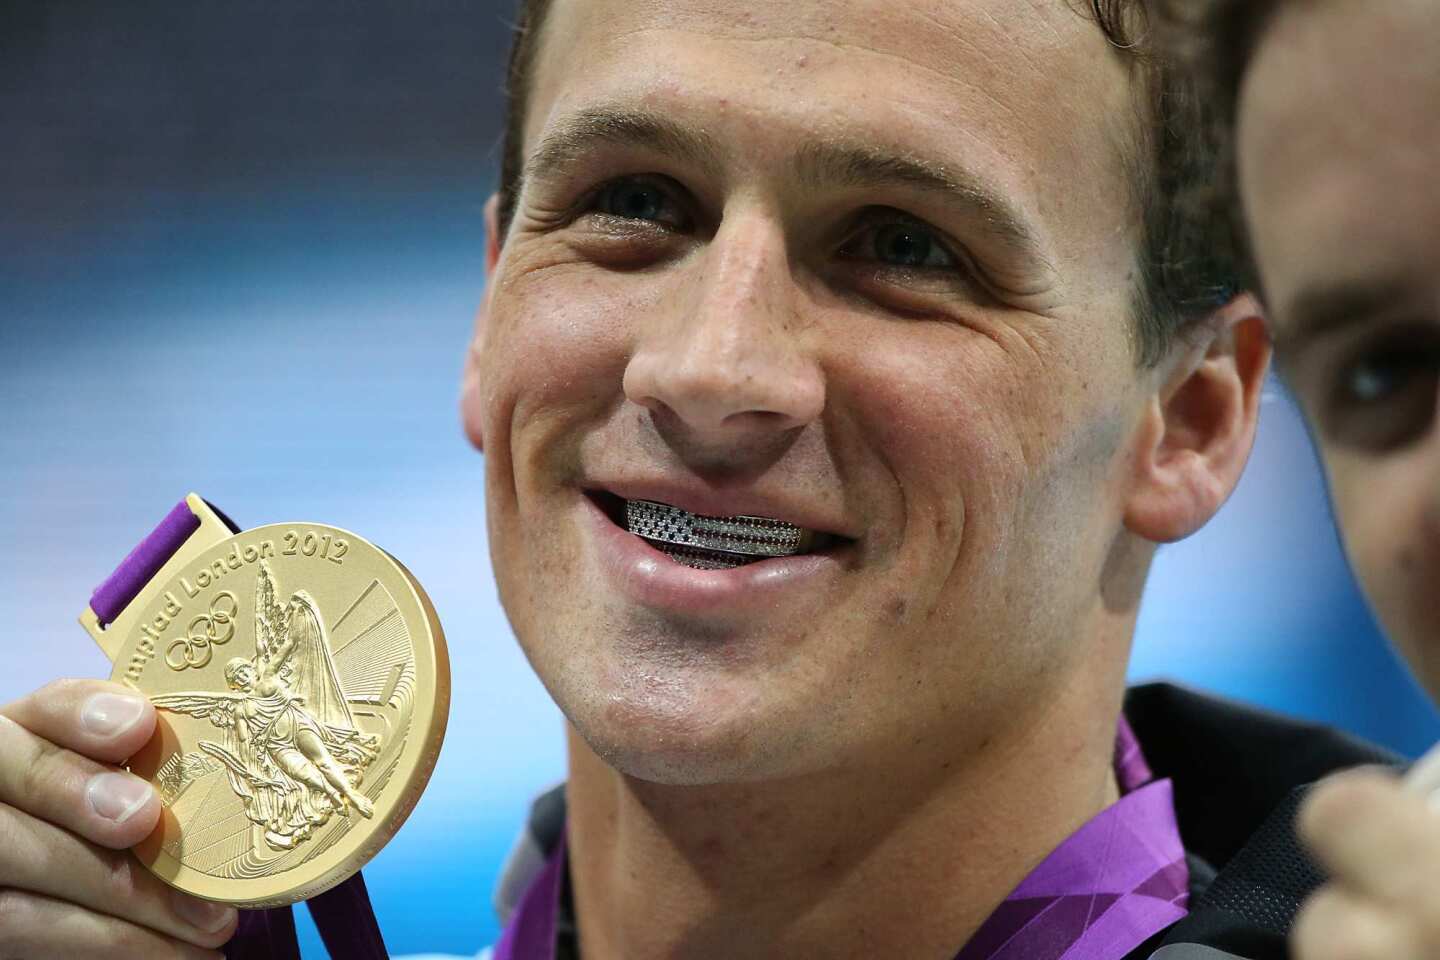 Ryan Lochte shows off his American flag grills and gold medal after winning the men's 400m individual medley in London.